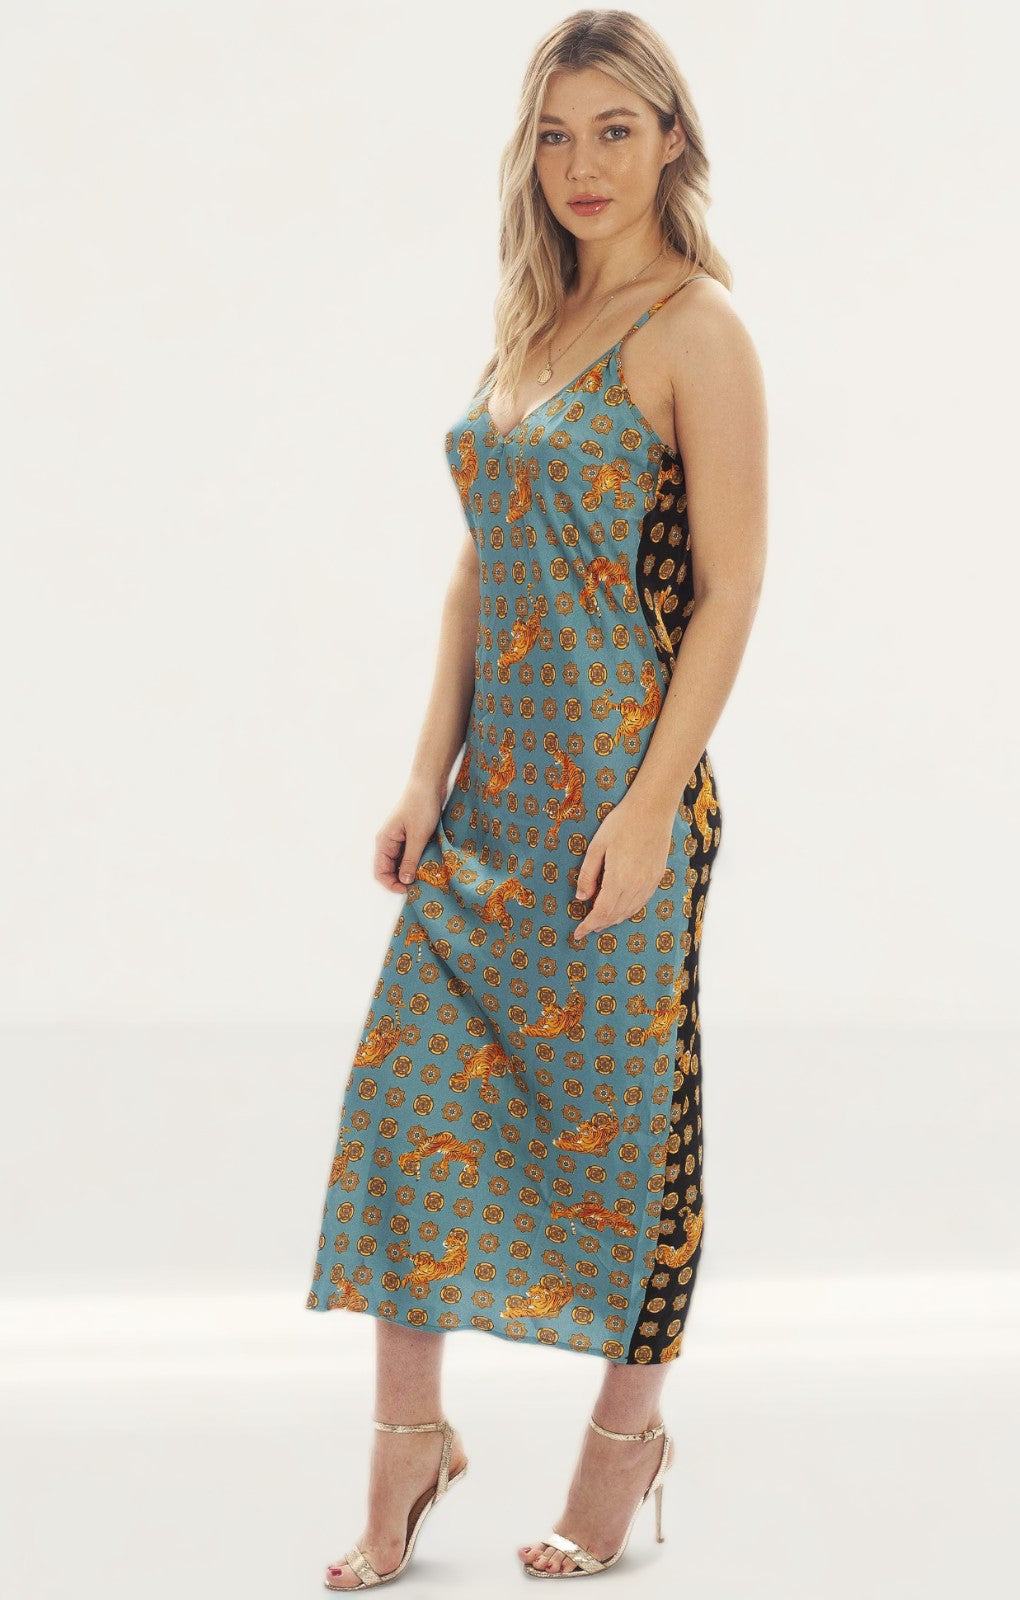 Never Fully Dressed Tiger Print Maxi Dress product image